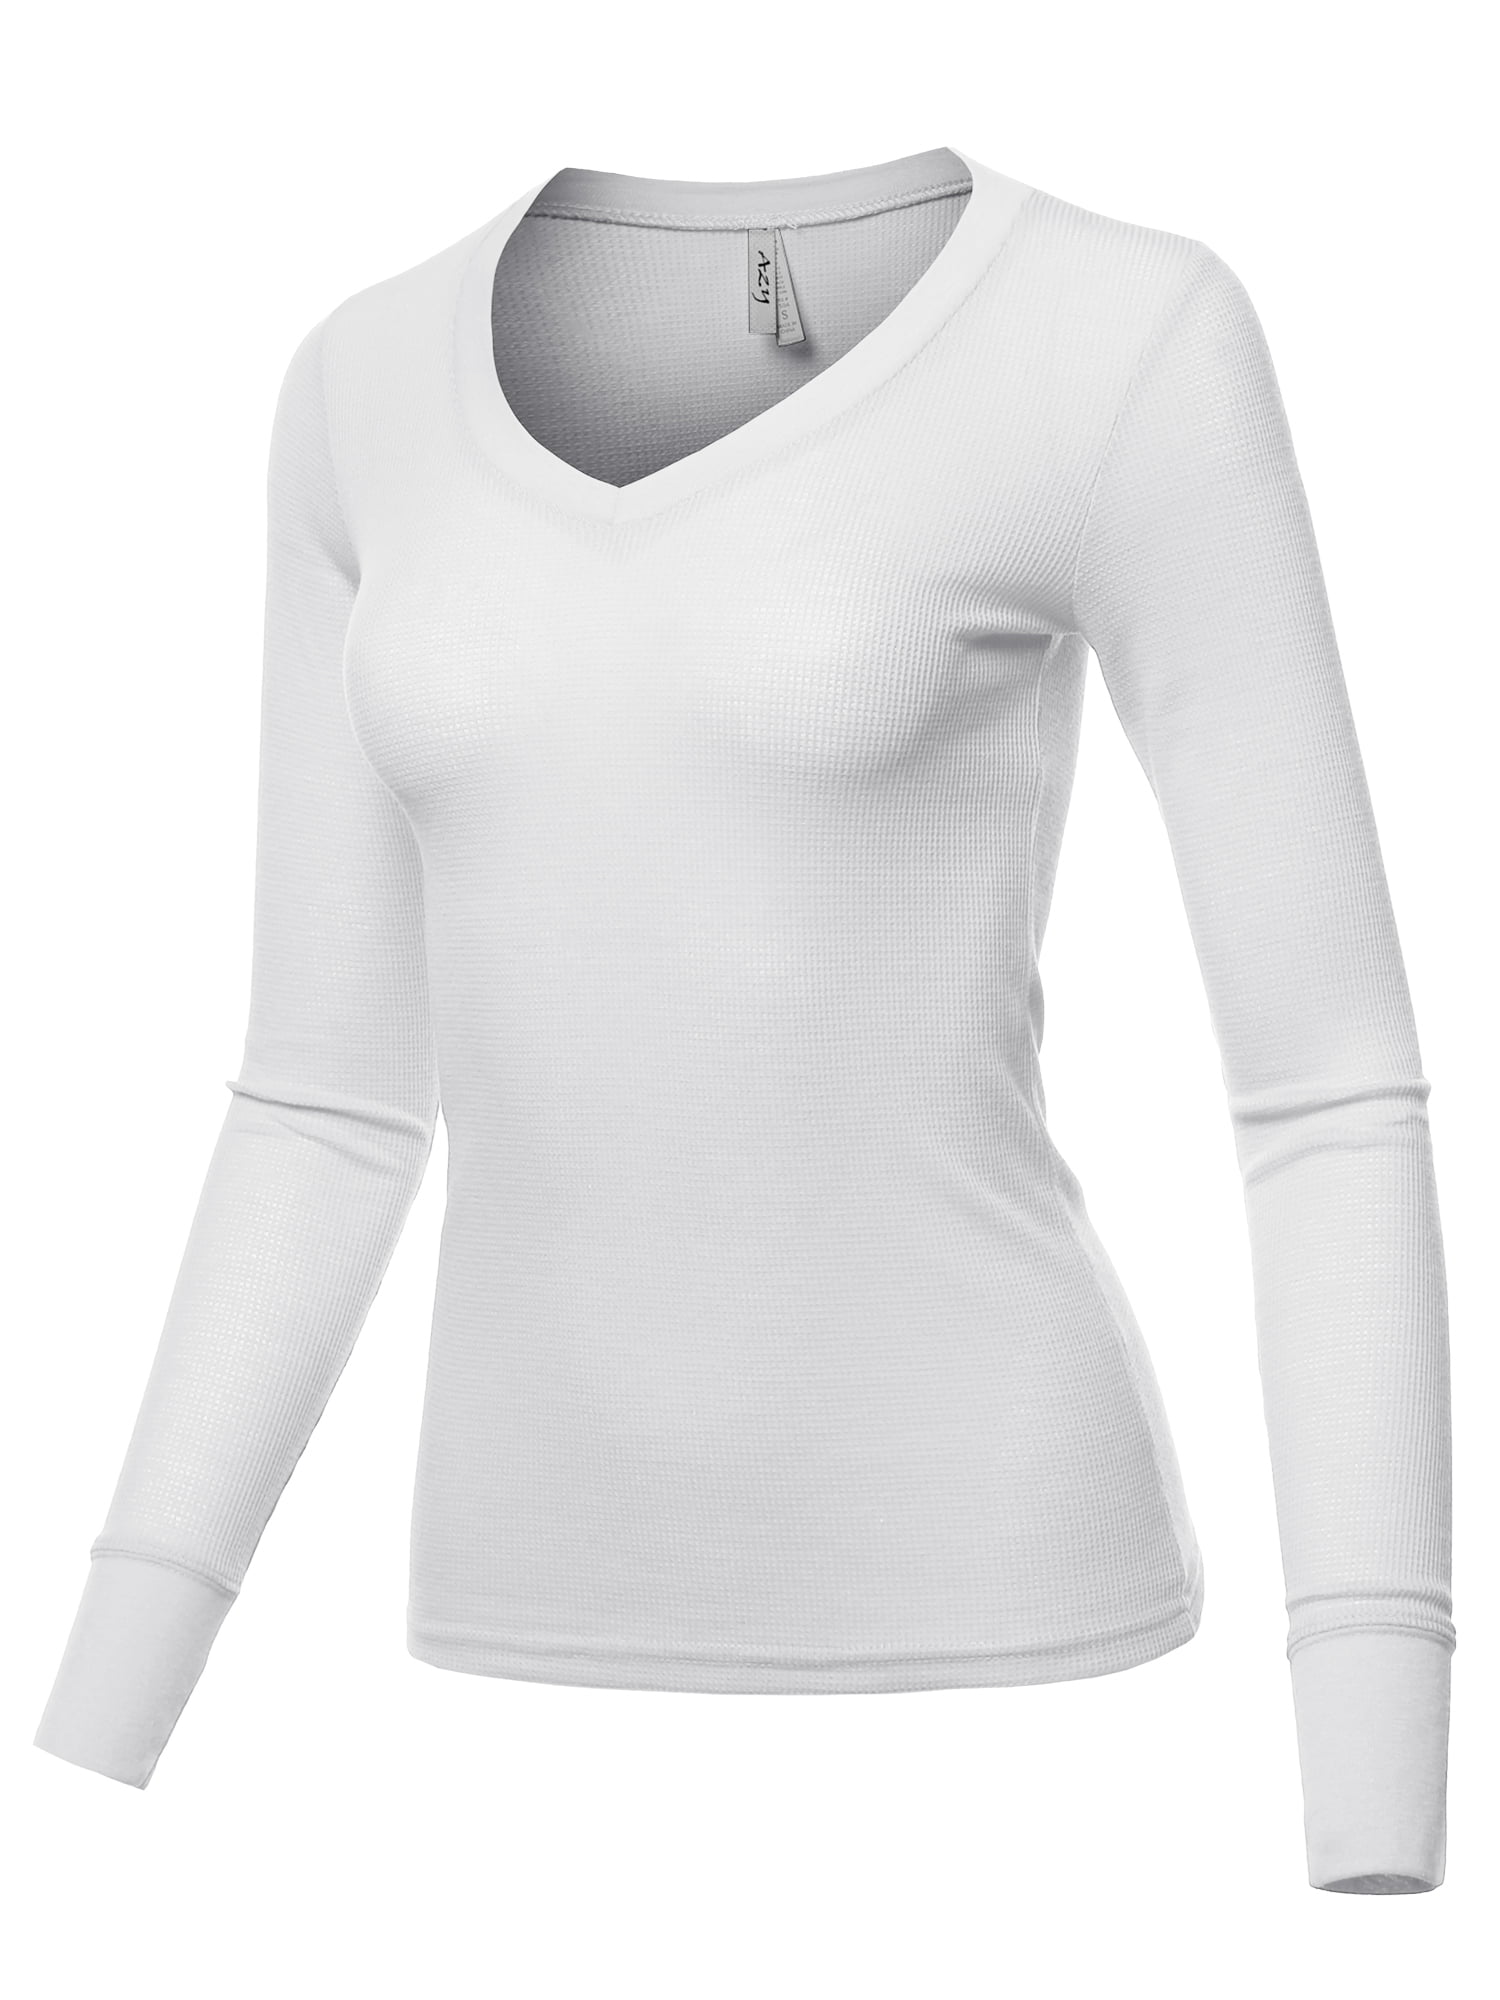 A2Y Women's Basic Solid Long Sleeve V Neck Fitted Thermal Top Shirt ...